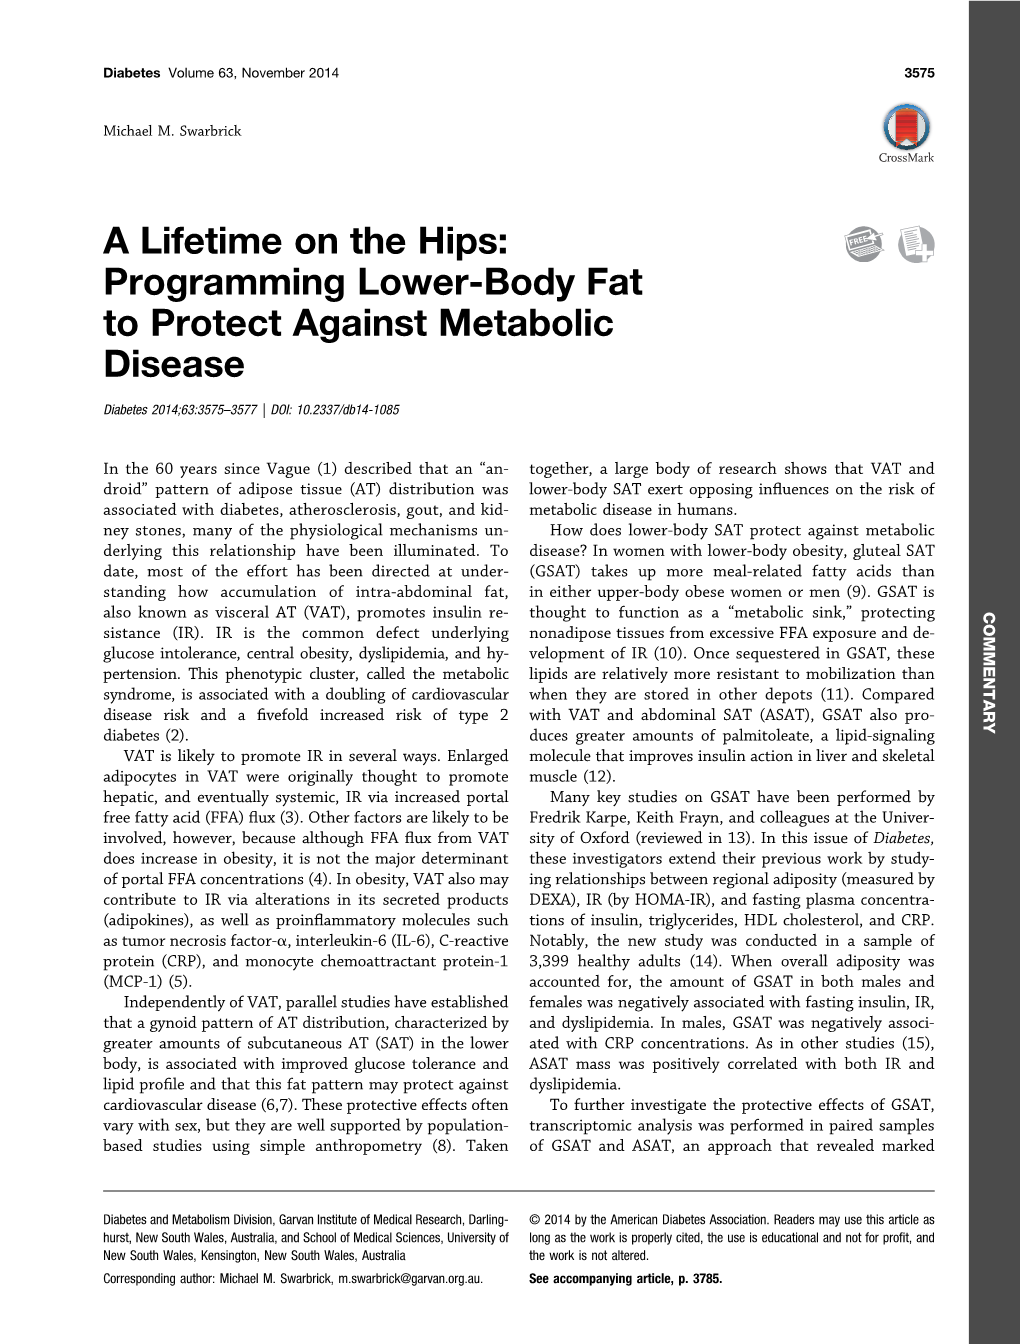 Programming Lower-Body Fat to Protect Against Metabolic Disease